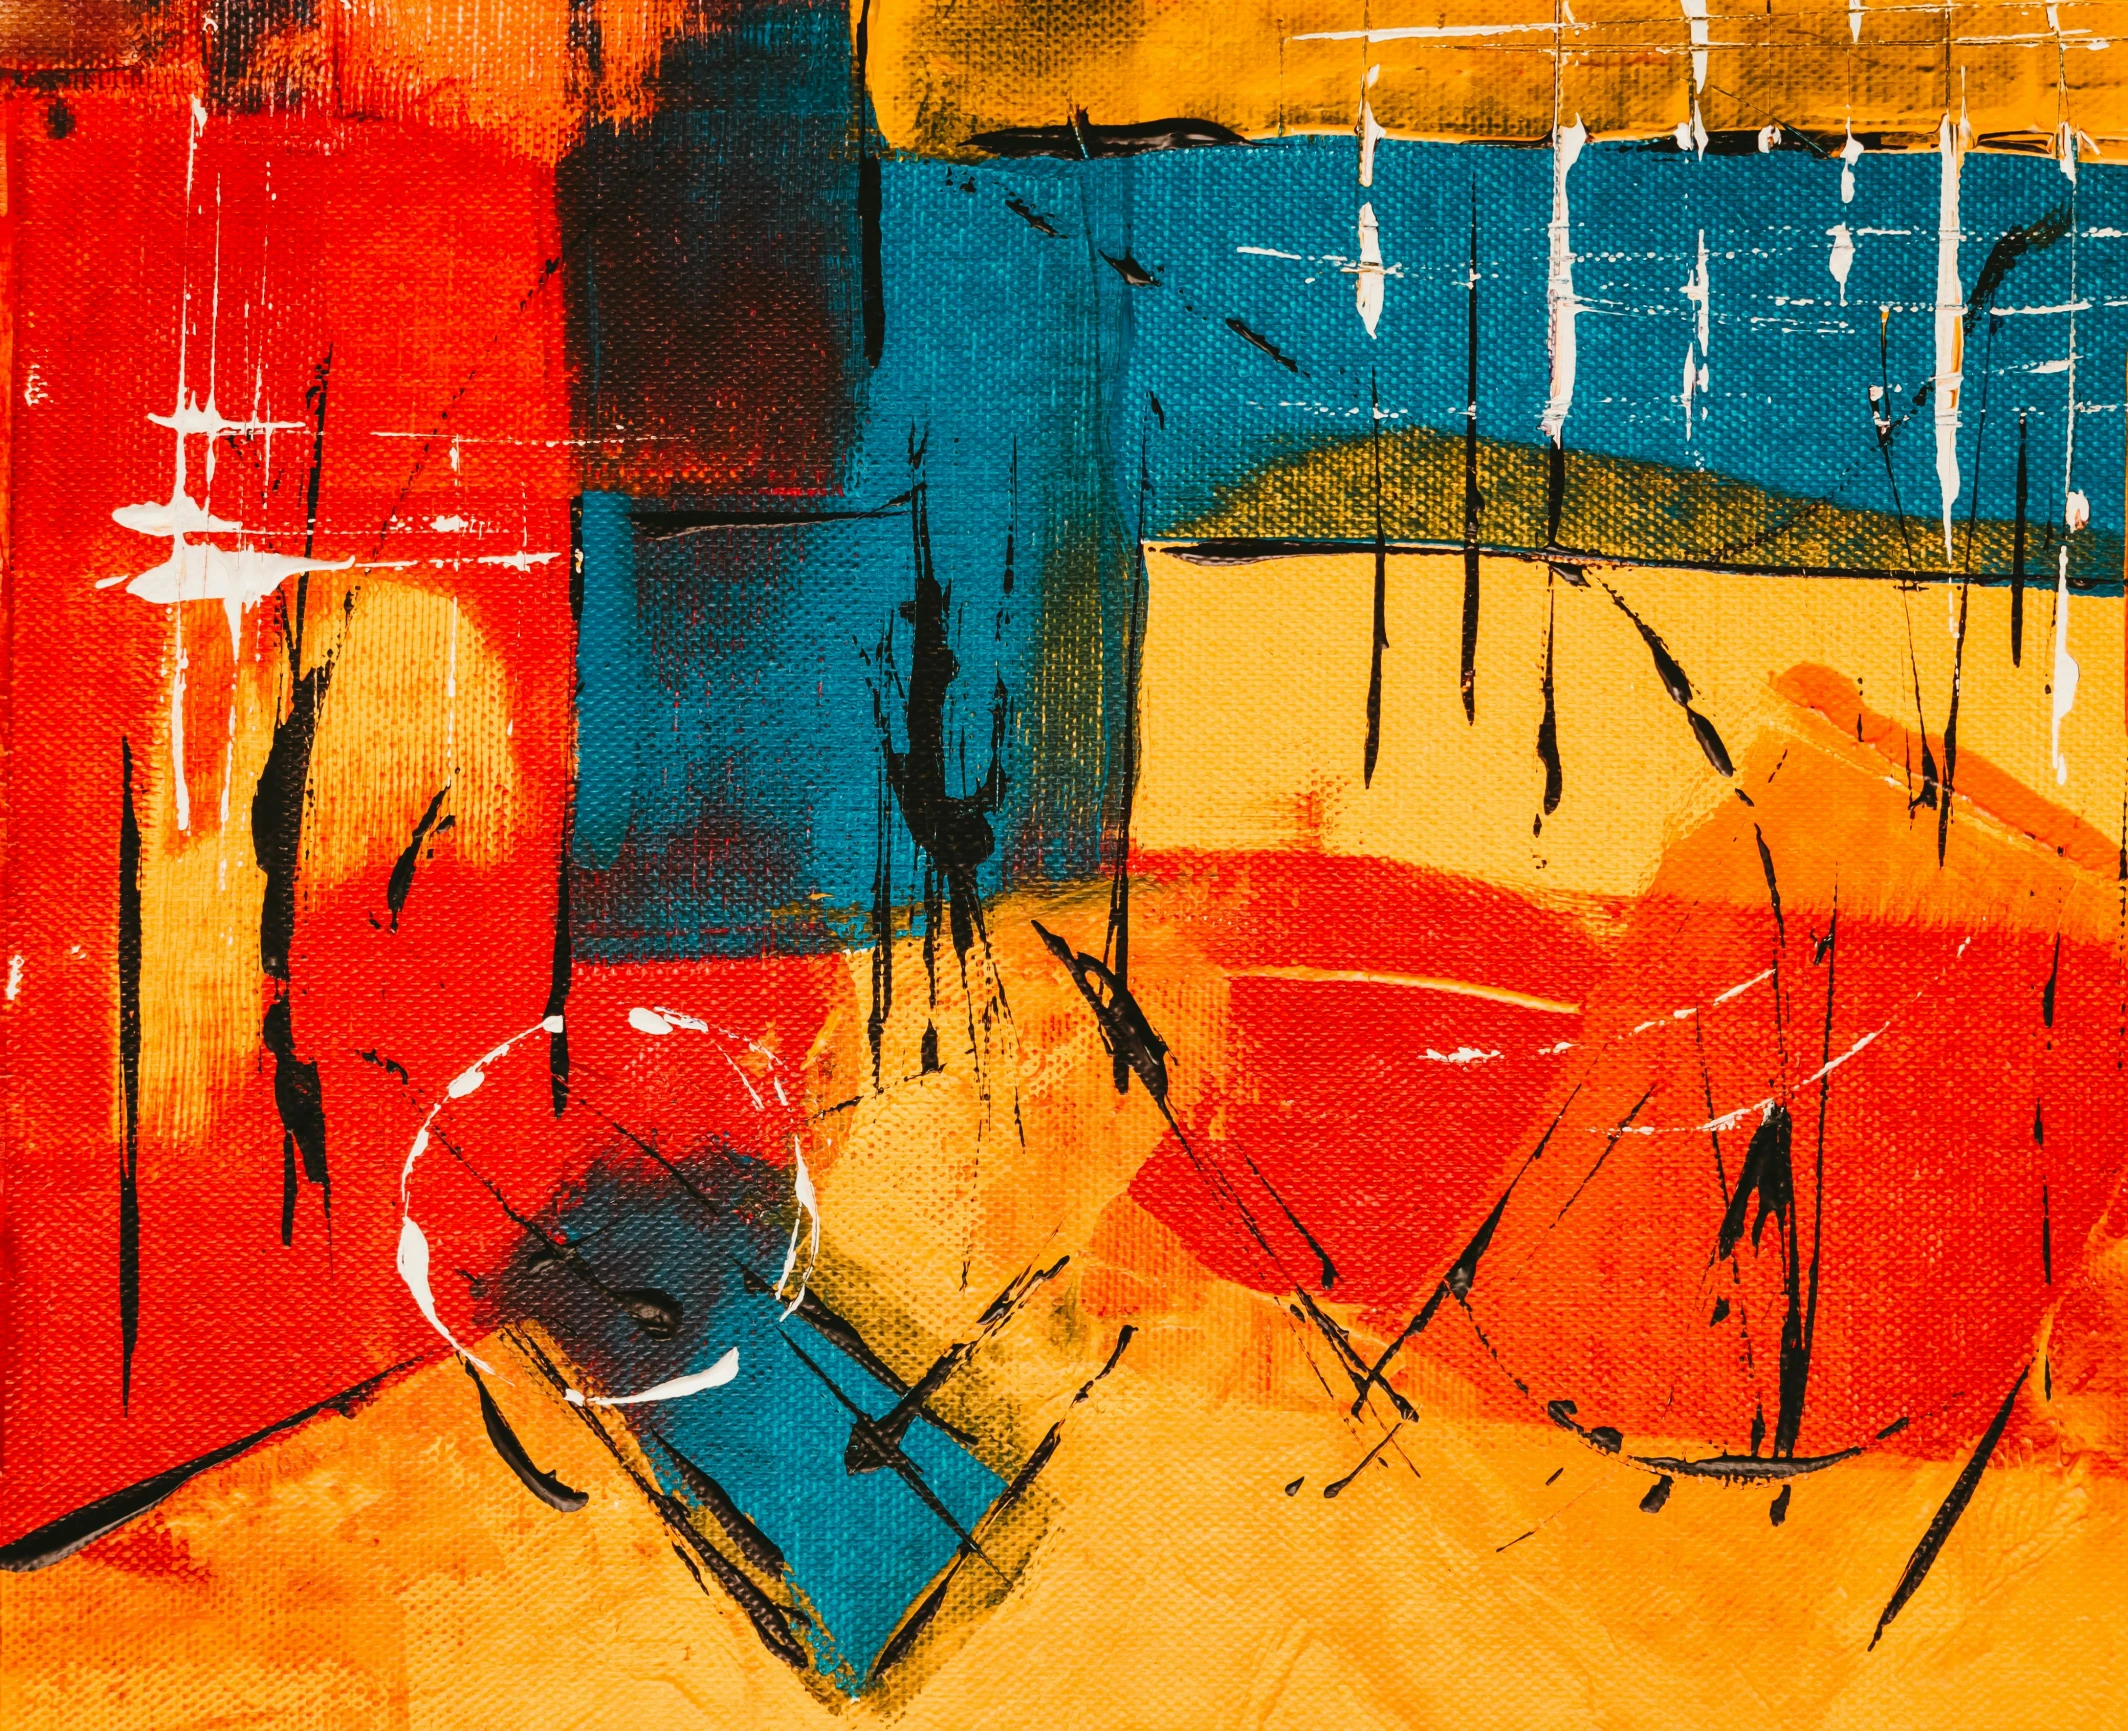 an abstract painting with red, yellow and blue colors, by Micha Klein, pexels, abstract art, red yellow, cubist, painting on canvas